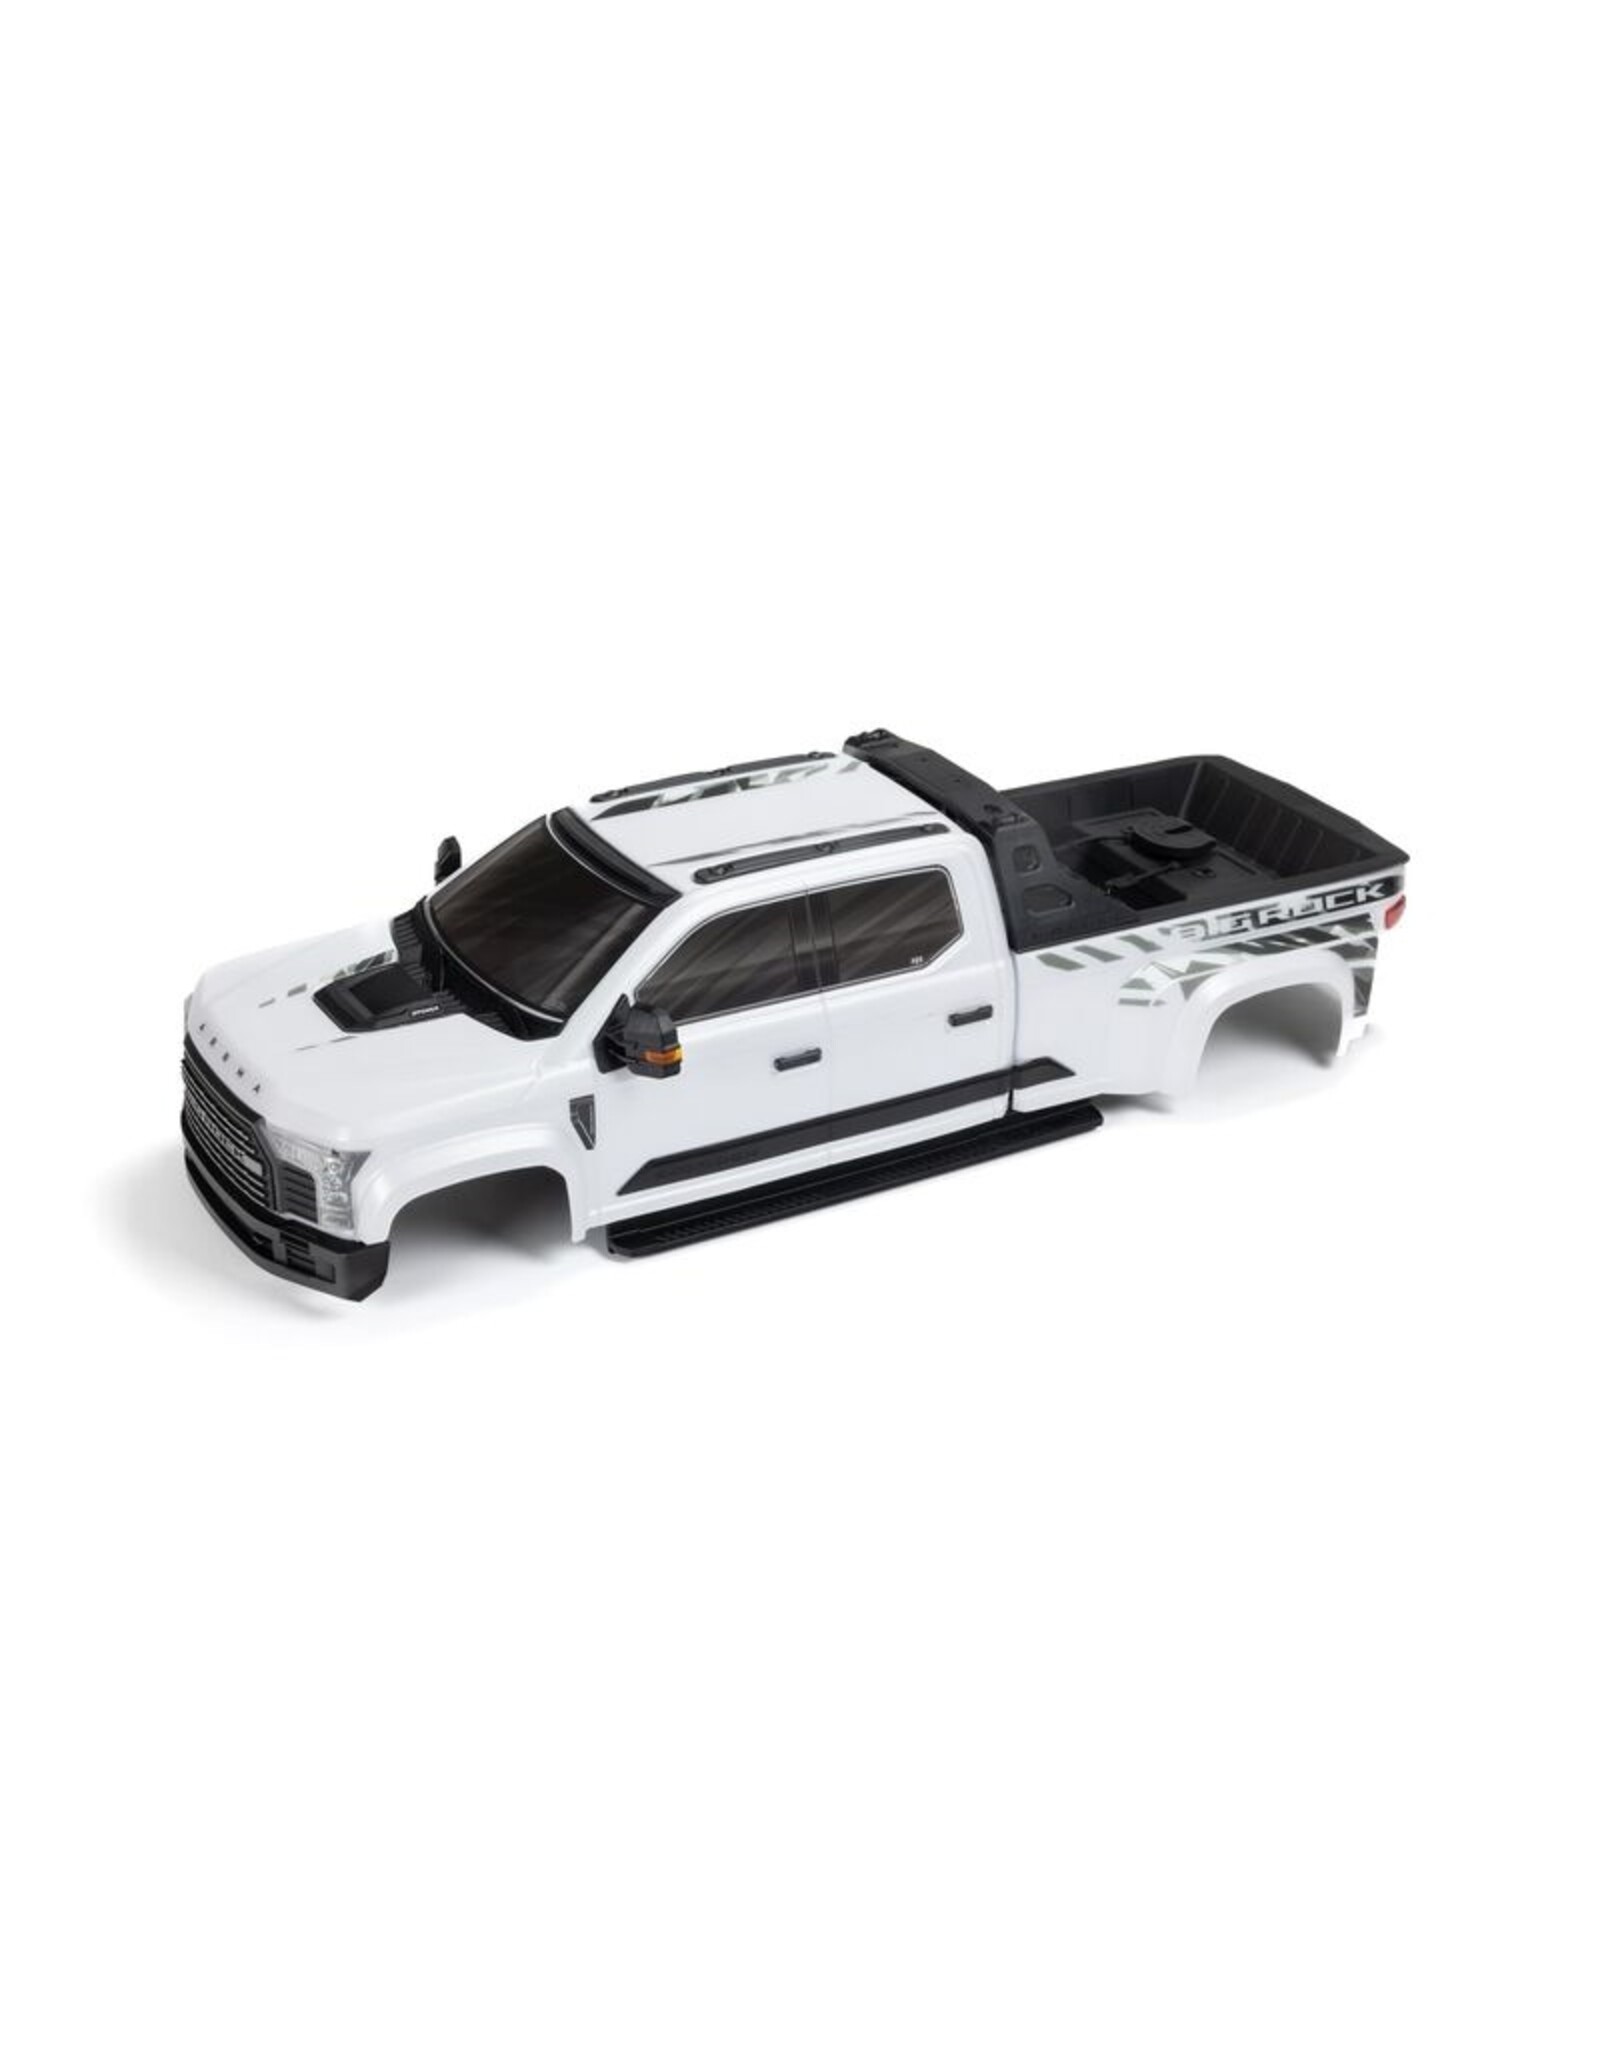 Arrma BIG ROCK 6S BLX Painted Decaled Trimmed Body, White